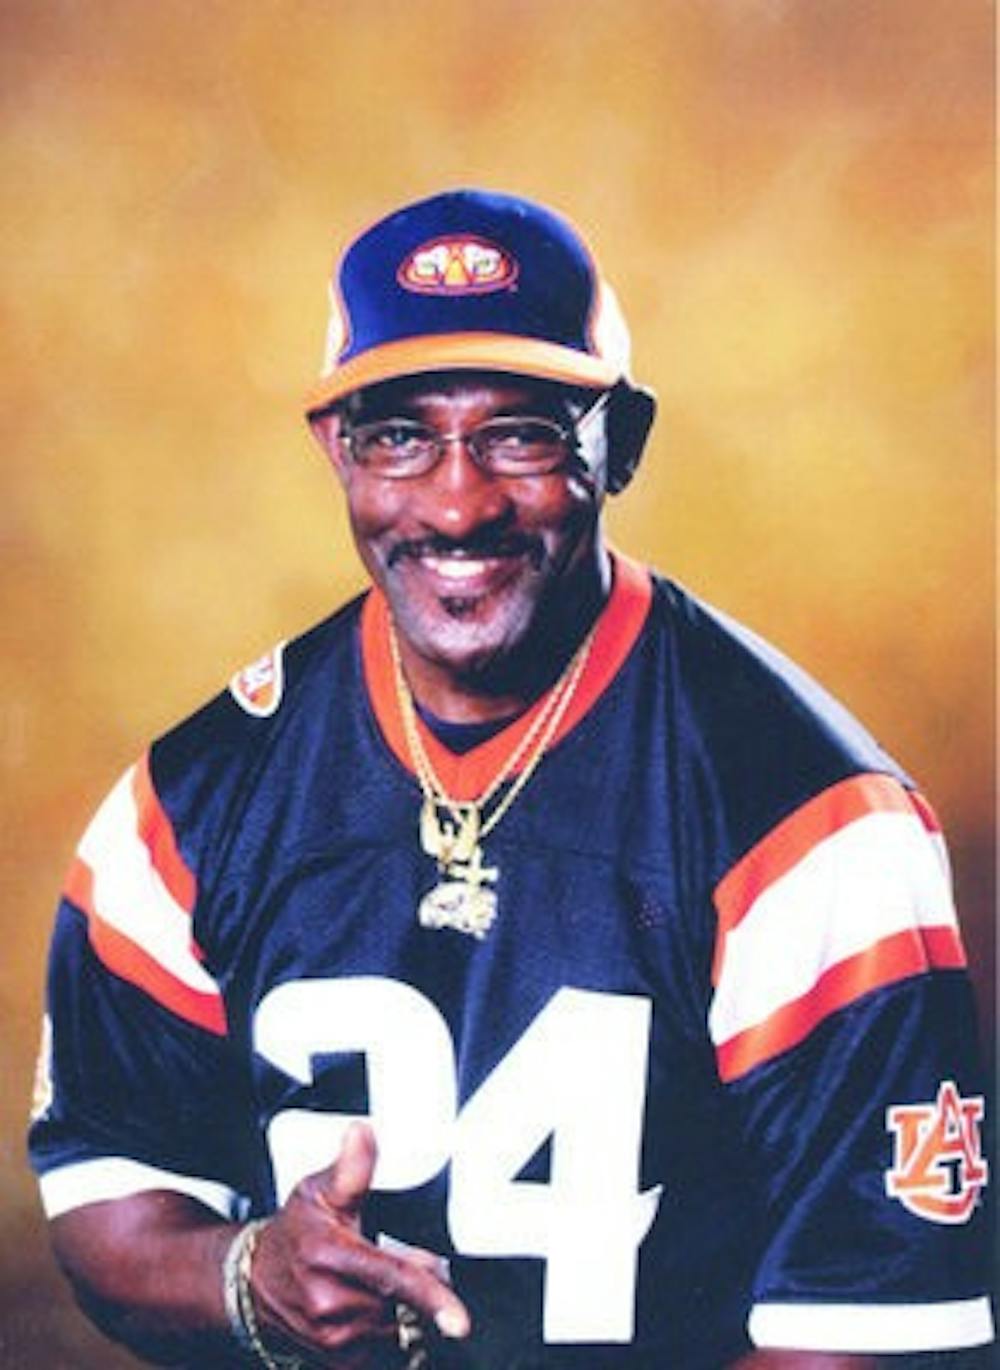 Lifelong Auburn resident Johnny Richmond, also known as Mr. Penny, does 25 push-ups every time Auburn scores. (Contributed)